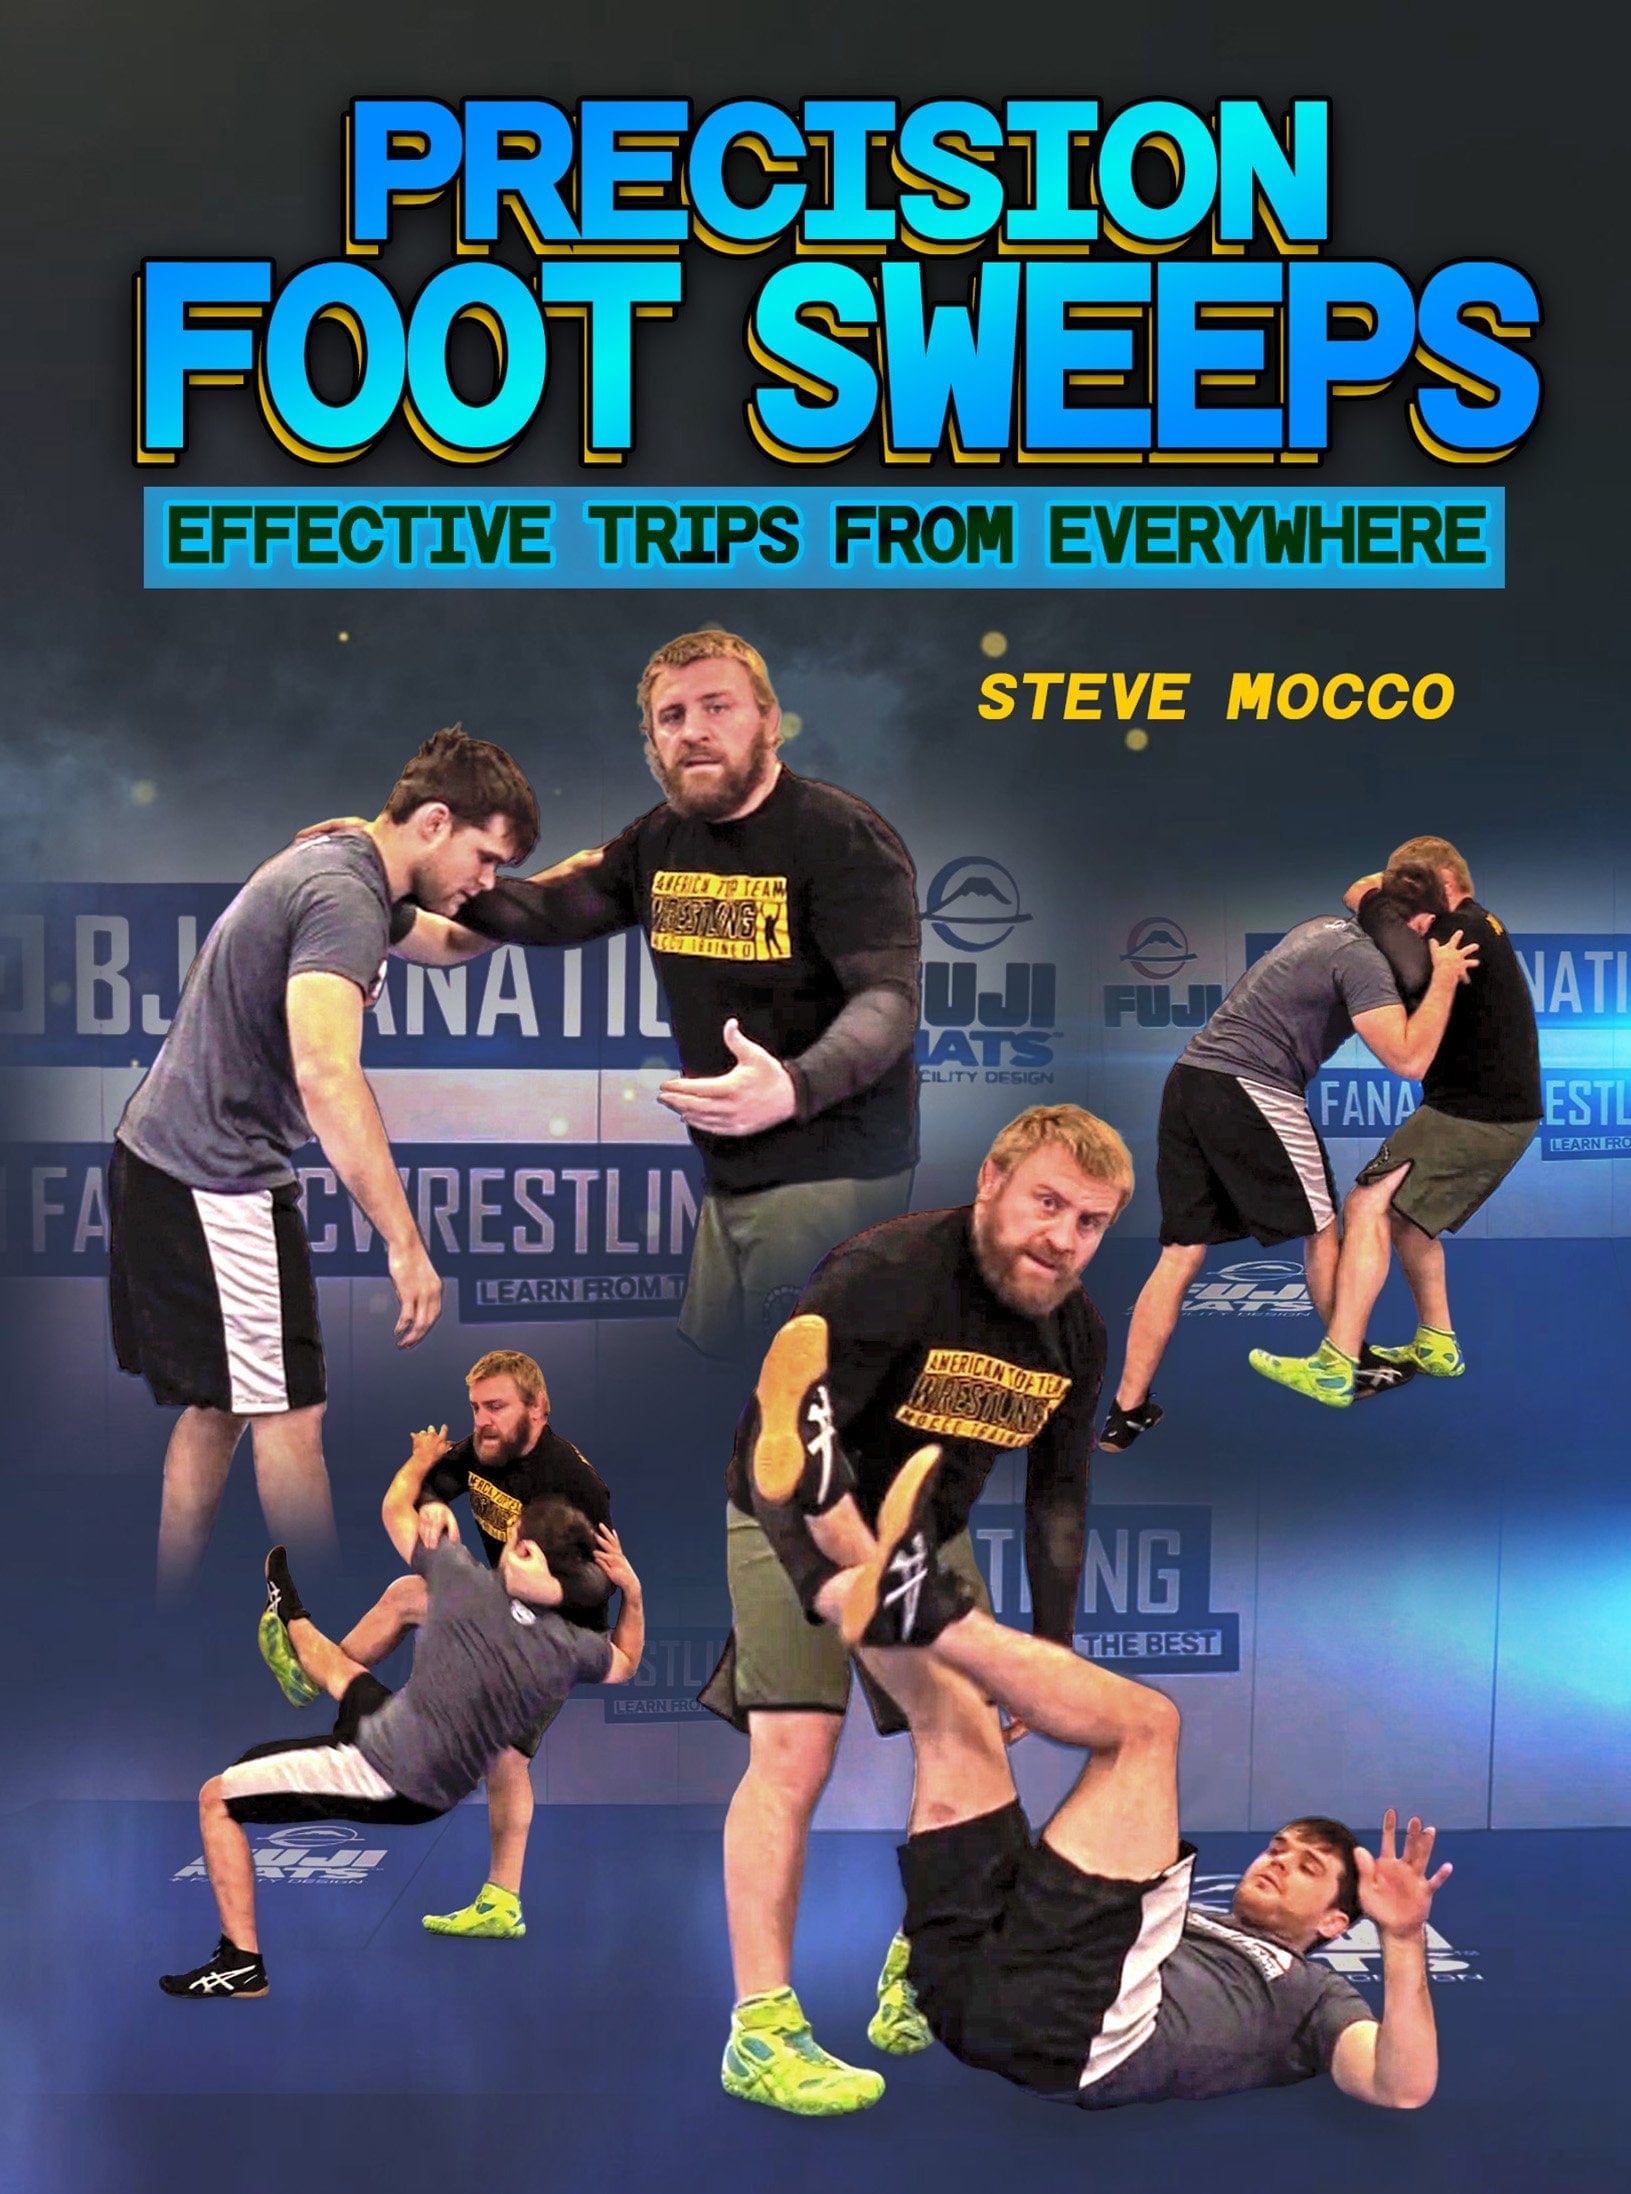 Precision Foot Sweeps by Steve Mocco - Fanatic Wrestling